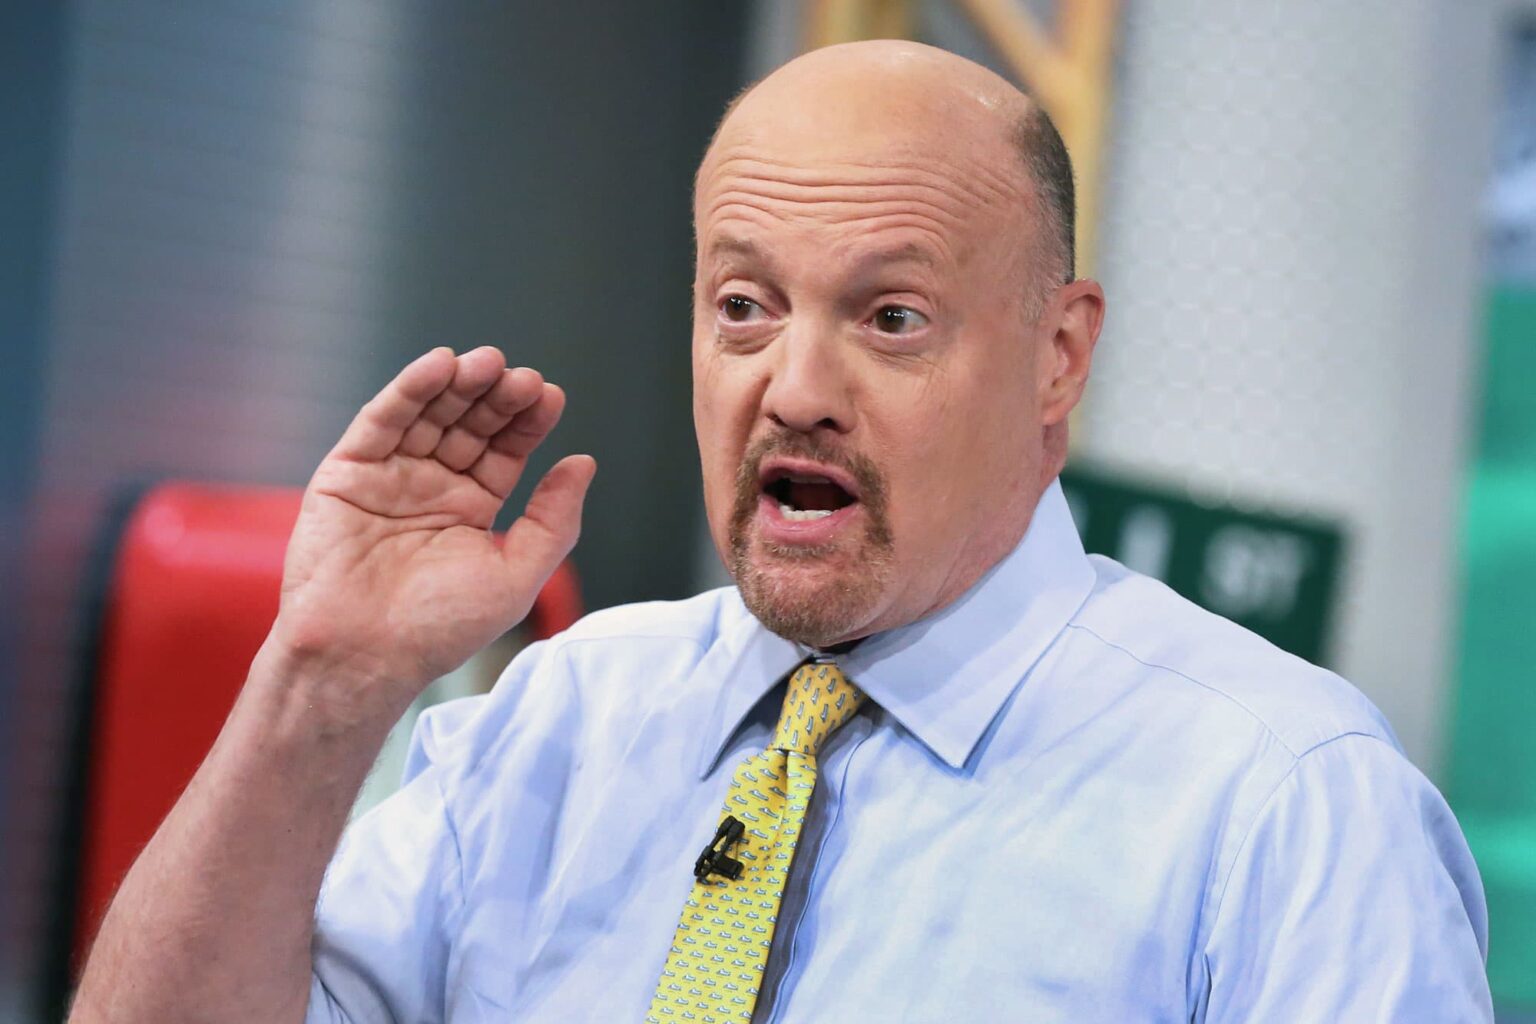 Jim Cramer’s current annual salary is estimated to hit $5 million, yet, what’s the actual net worth of Cramer in 2022? Here's all you need to know.